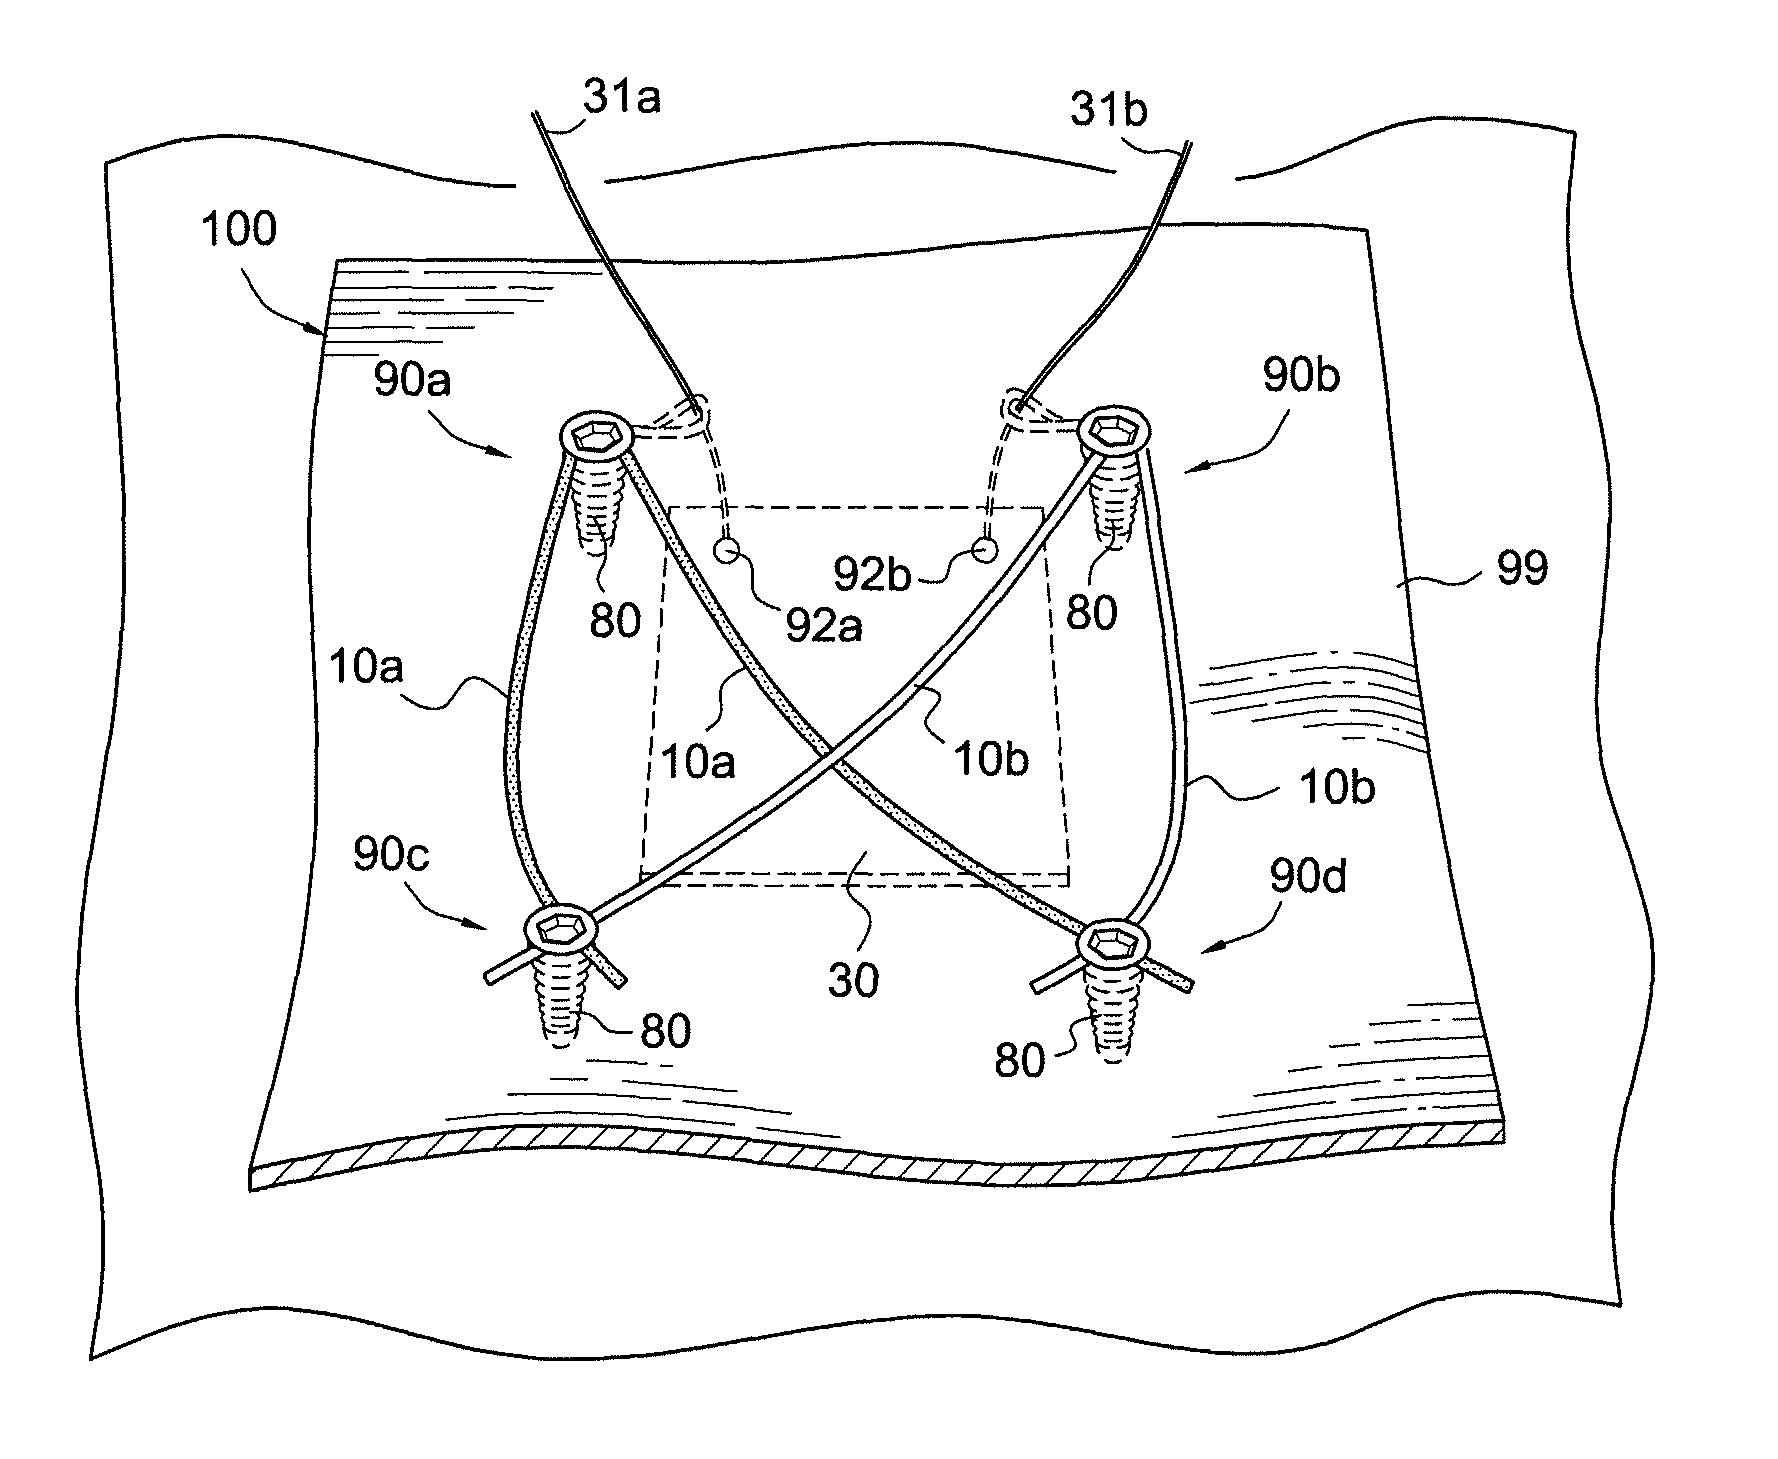 Method of forming knotless double row construct with graft or patch fixed under repair site